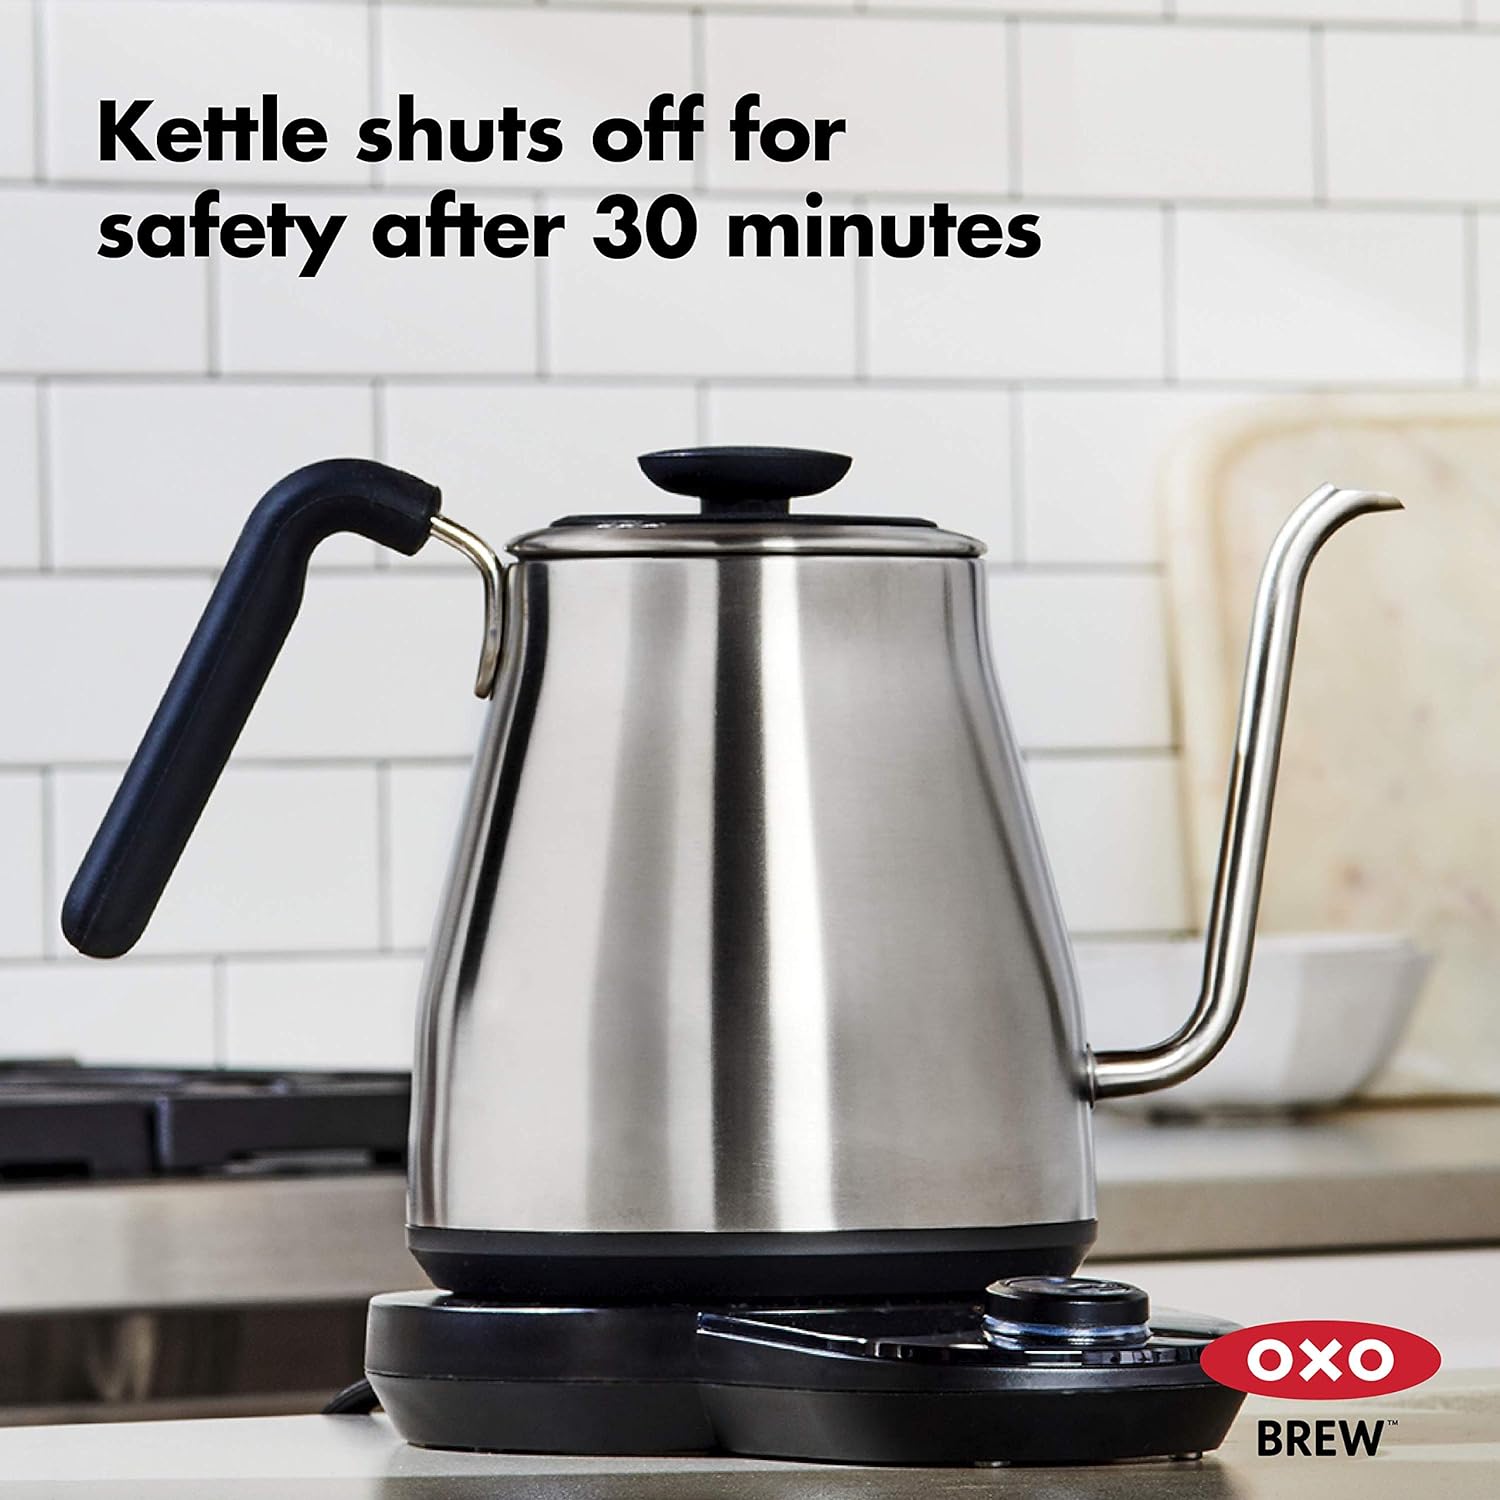 https://bigbigmart.com/wp-content/uploads/2023/12/OXO-Brew-Gooseneck-Electric-Kettle-%E2%80%93-Hot-Water-Kettle-Pour-Over-Coffee-Tea-Kettle-Adjustable-Temperature-Built-In-Brew-Timer-Stainless-Steel-1L%E2%80%8B5.jpg